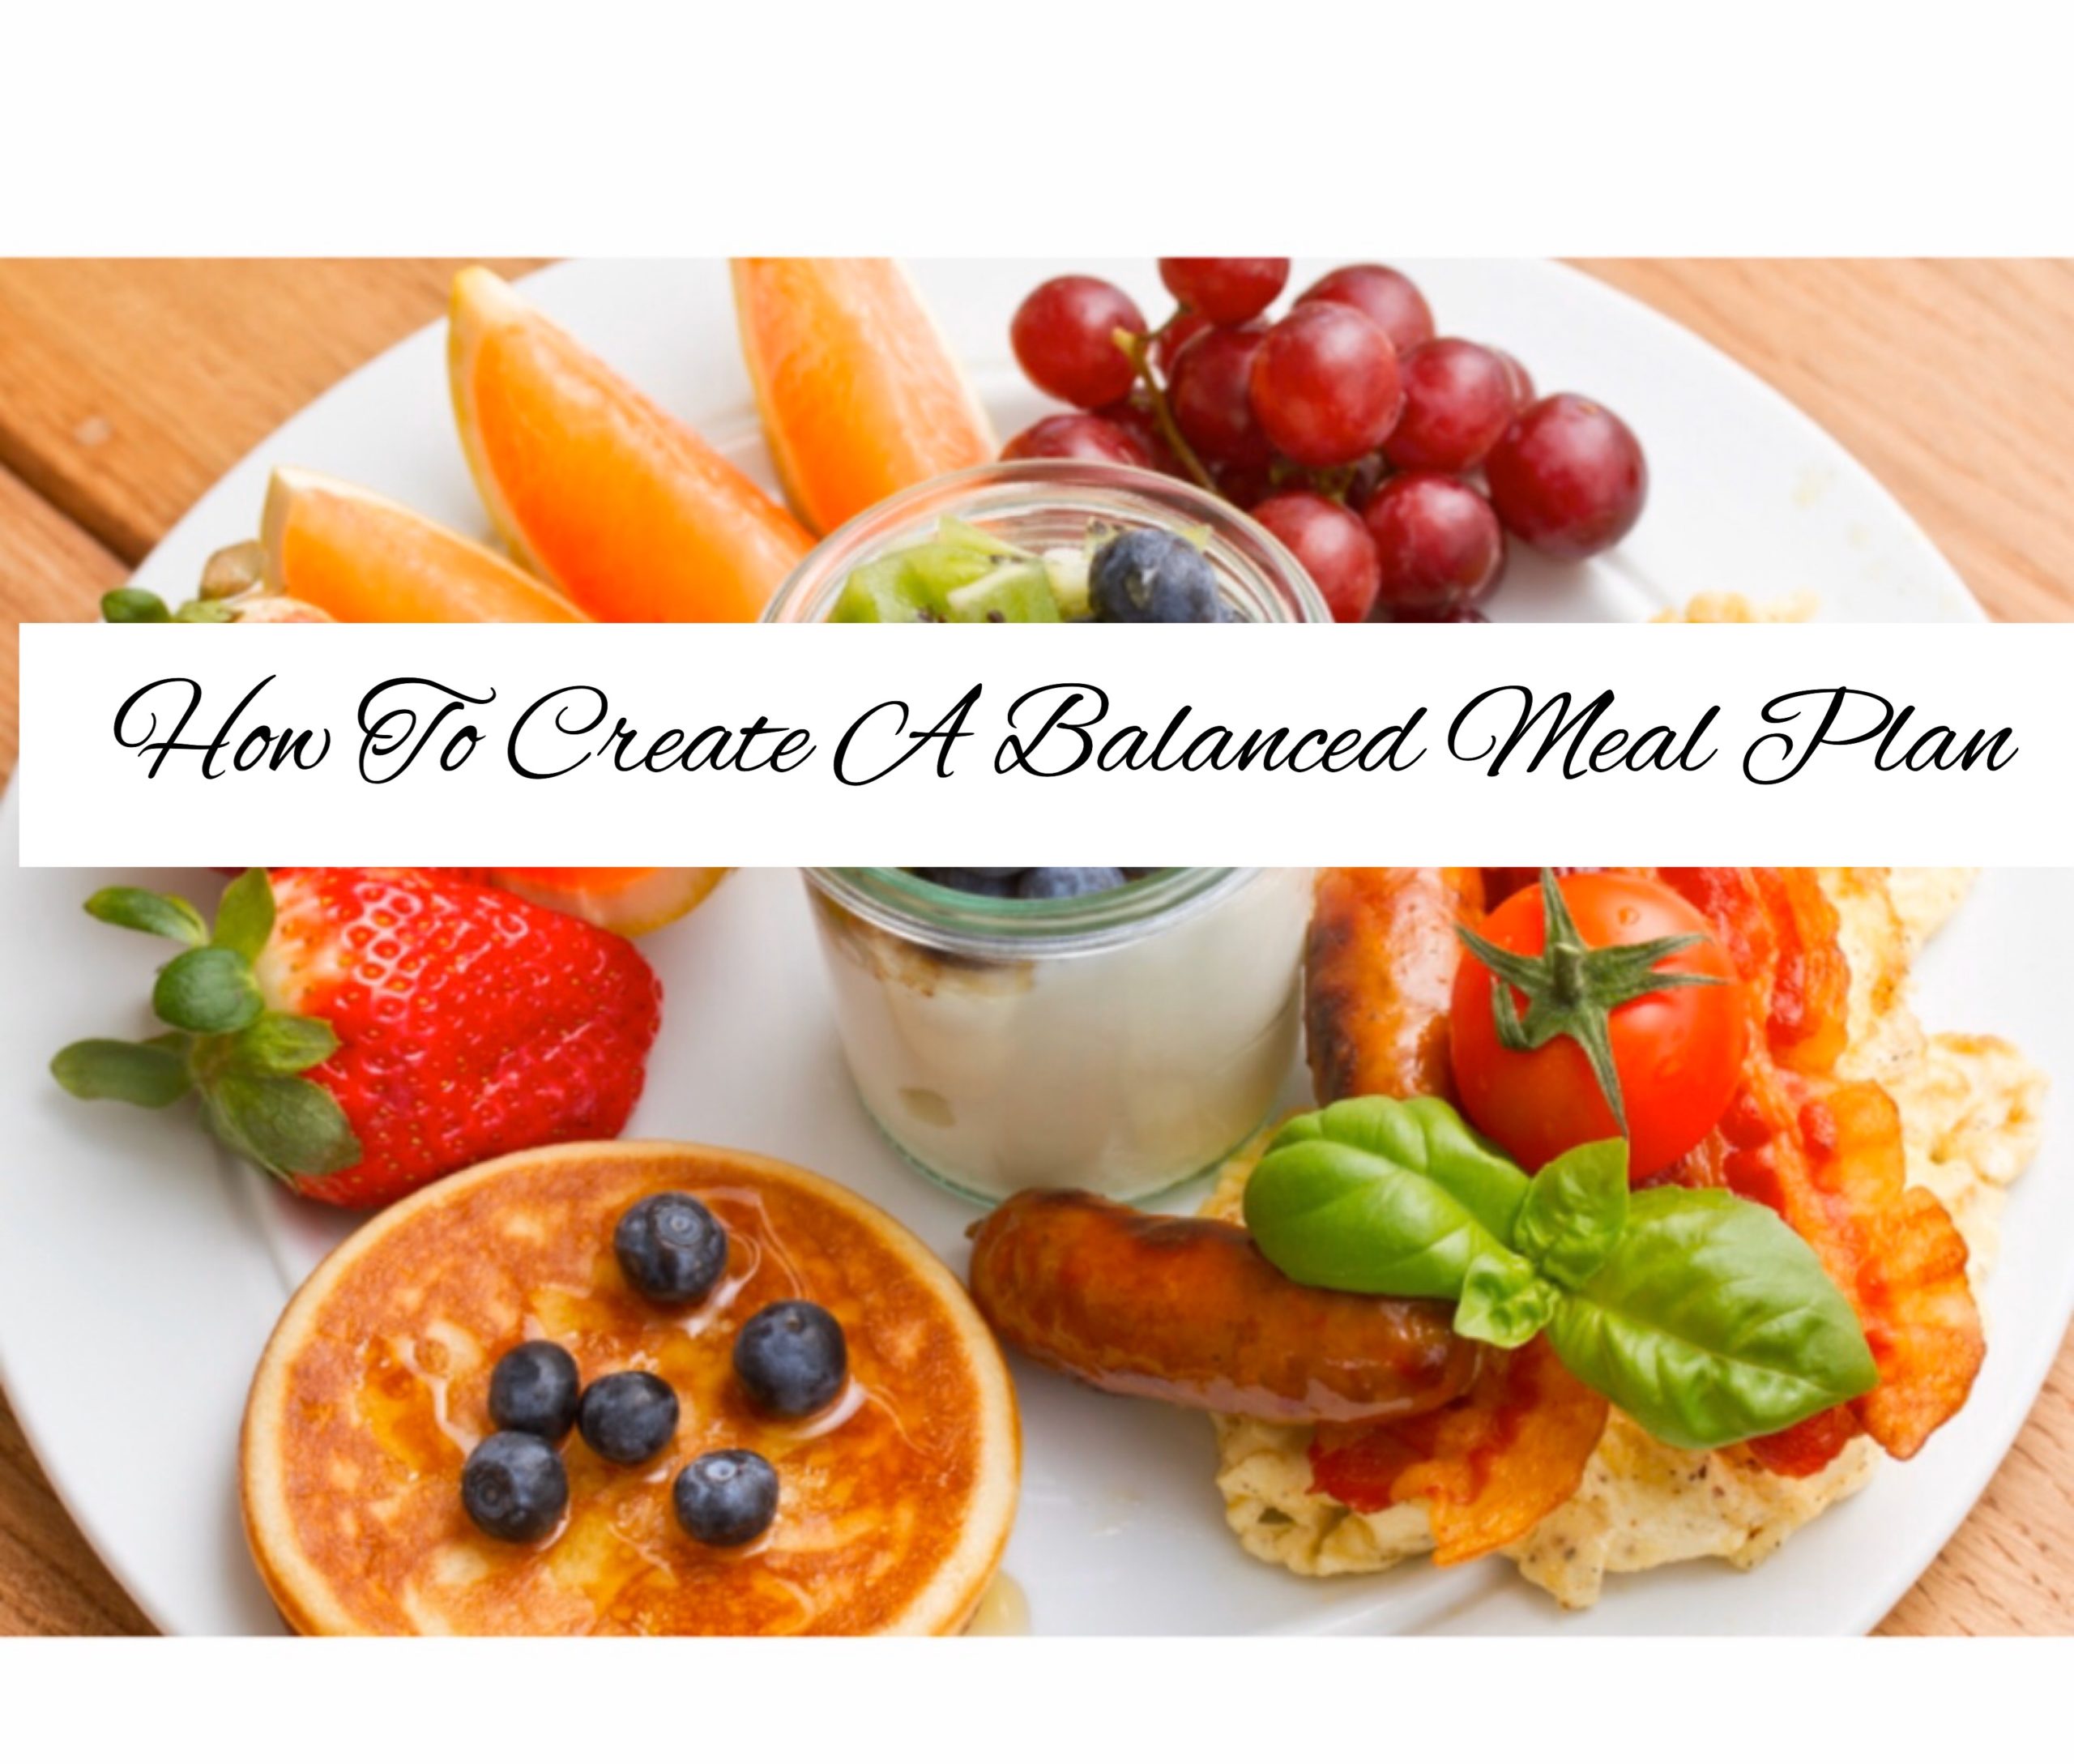 What to Expect on Your Balance Meal Plan